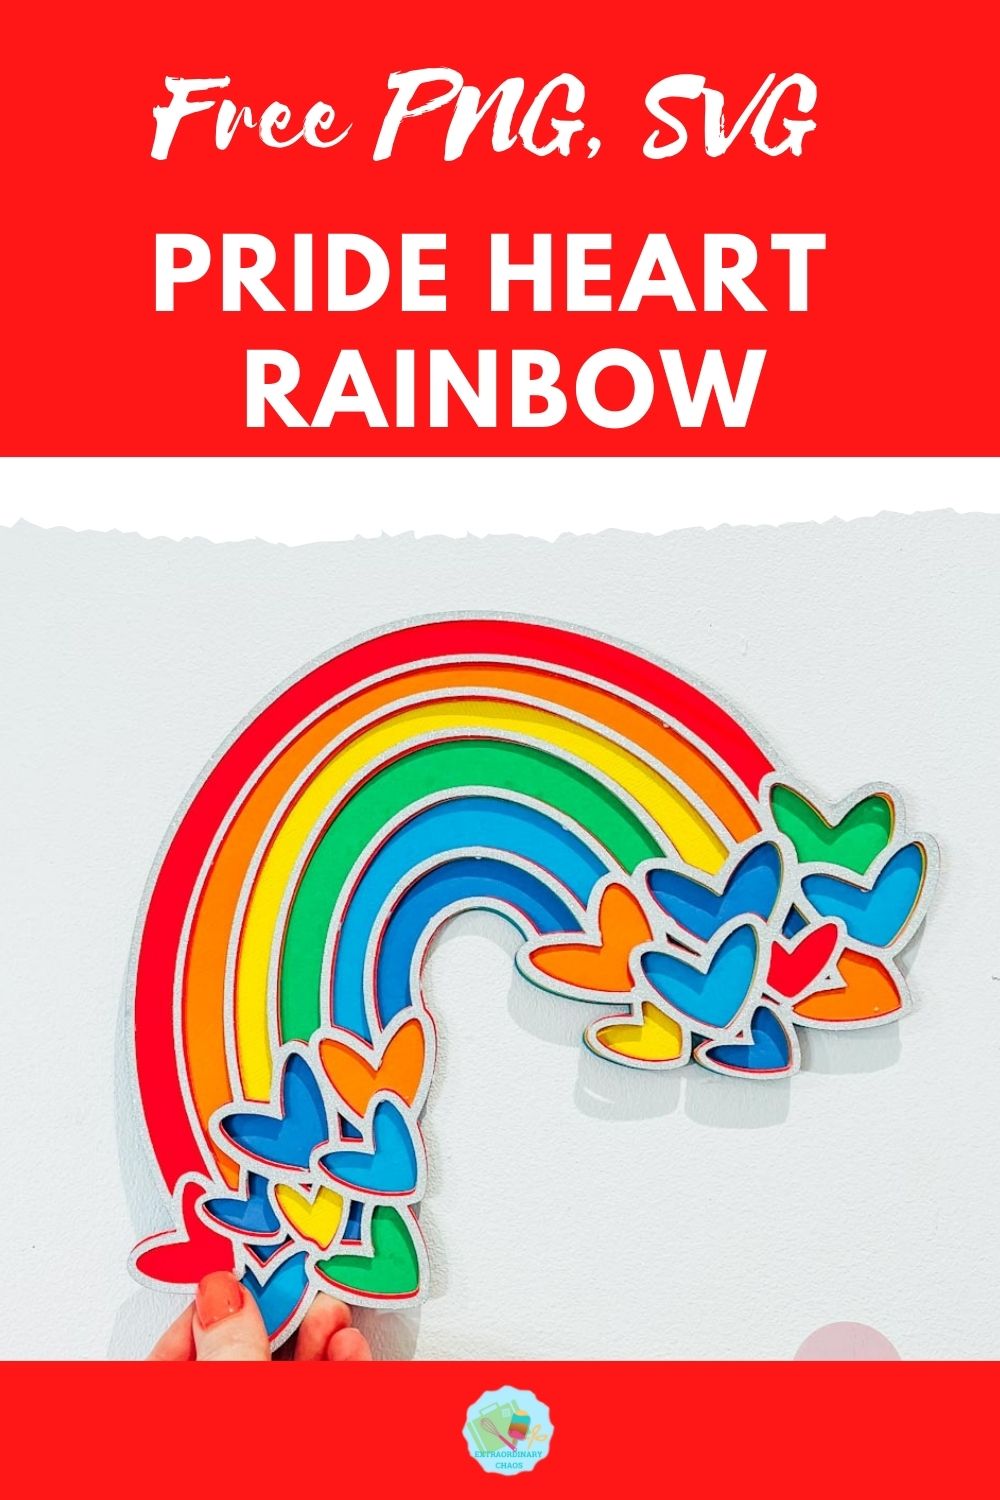 Free SVG, PNG Pride Heart Rainbow for Cricut and Glowforge